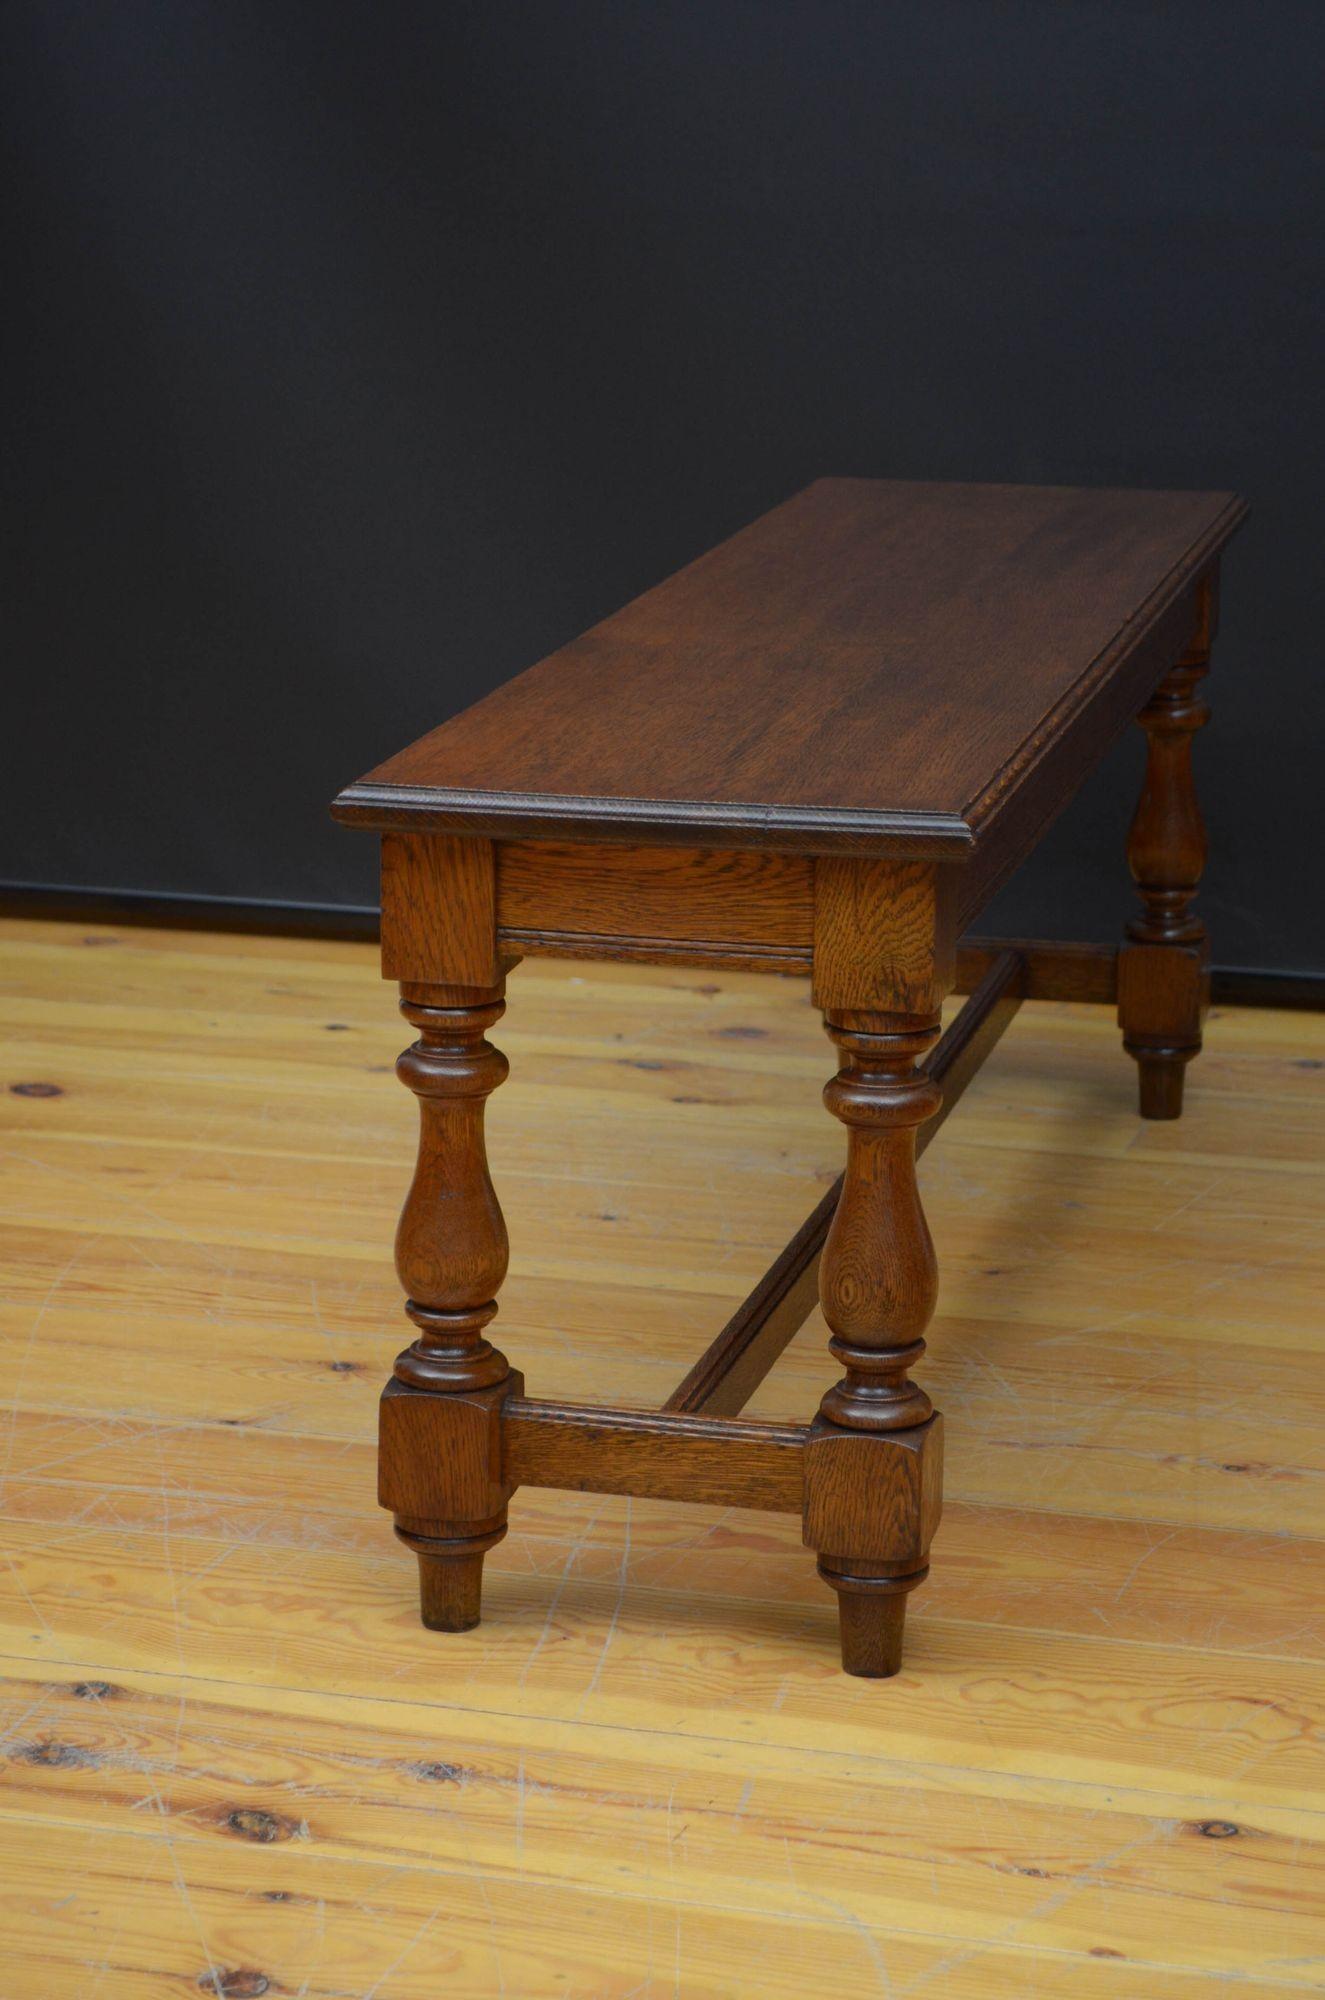 Sn5484 Late Victorian solid oak hall seat, having long top with moulded edge above reeded frieze, all standing on four turned and shaped legs united by stretchers. This antique hall bench has been sympathetically restored and is in home ready